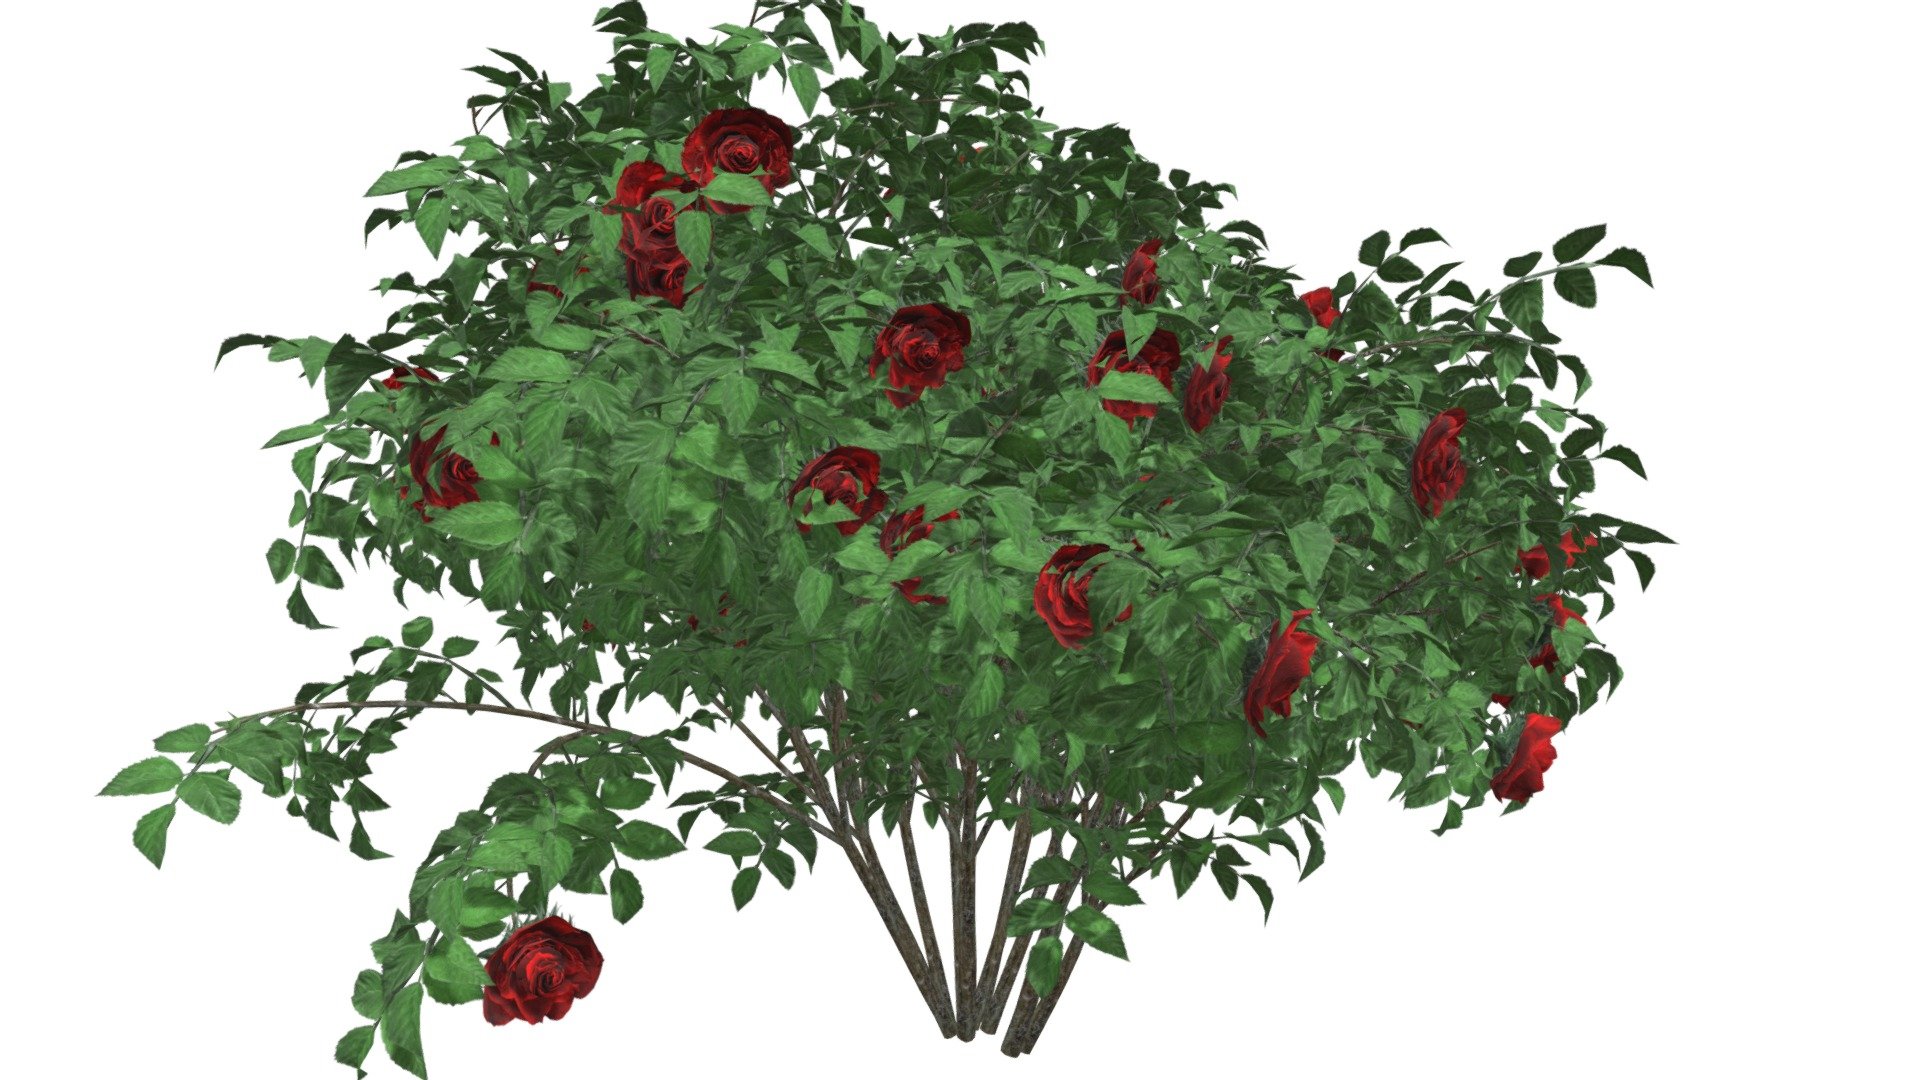 This 3D model of the Red Rose Bush is a highly detailed and photorealistic option suitable for architectural, landscaping, and video game projects. The model is designed with carefully crafted textures that mimic the natural beauty of a real Red Rose Bush. Its versatility allows it to bring a touch of realism to any project, whether it's a small architectural rendering or a large-scale landscape design. Additionally, the model is optimized for performance and features efficient UV mapping. This photorealistic 3D model is the perfect solution for architects, landscapers, and game developers who want to enhance the visual experience of their project with a highly detailed, photorealistic Red Rose Bush 3d model